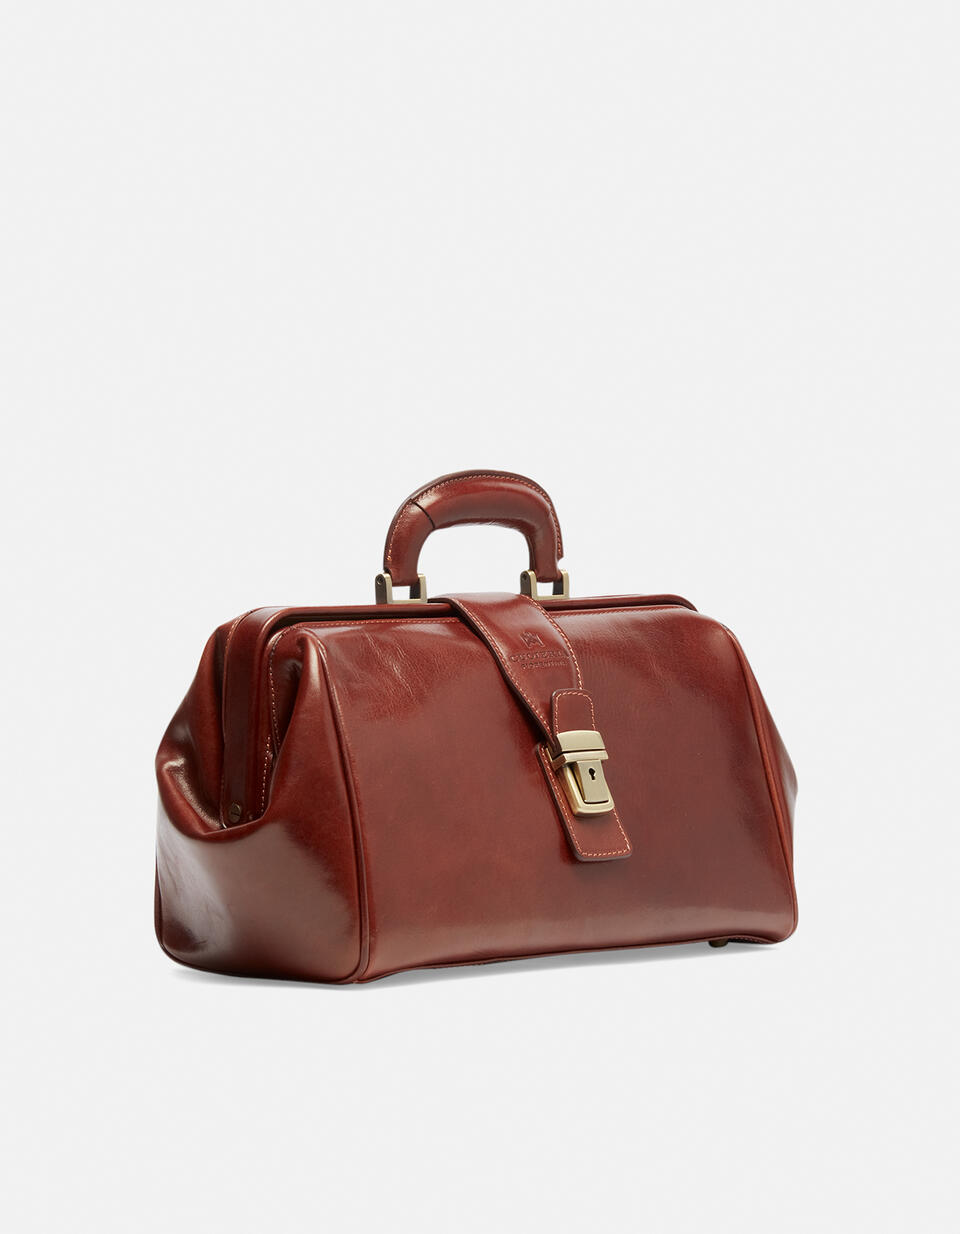 Small leather doctor's bag - Doctor Bags | Briefcases MARRONE - Doctor Bags | BriefcasesCuoieria Fiorentina